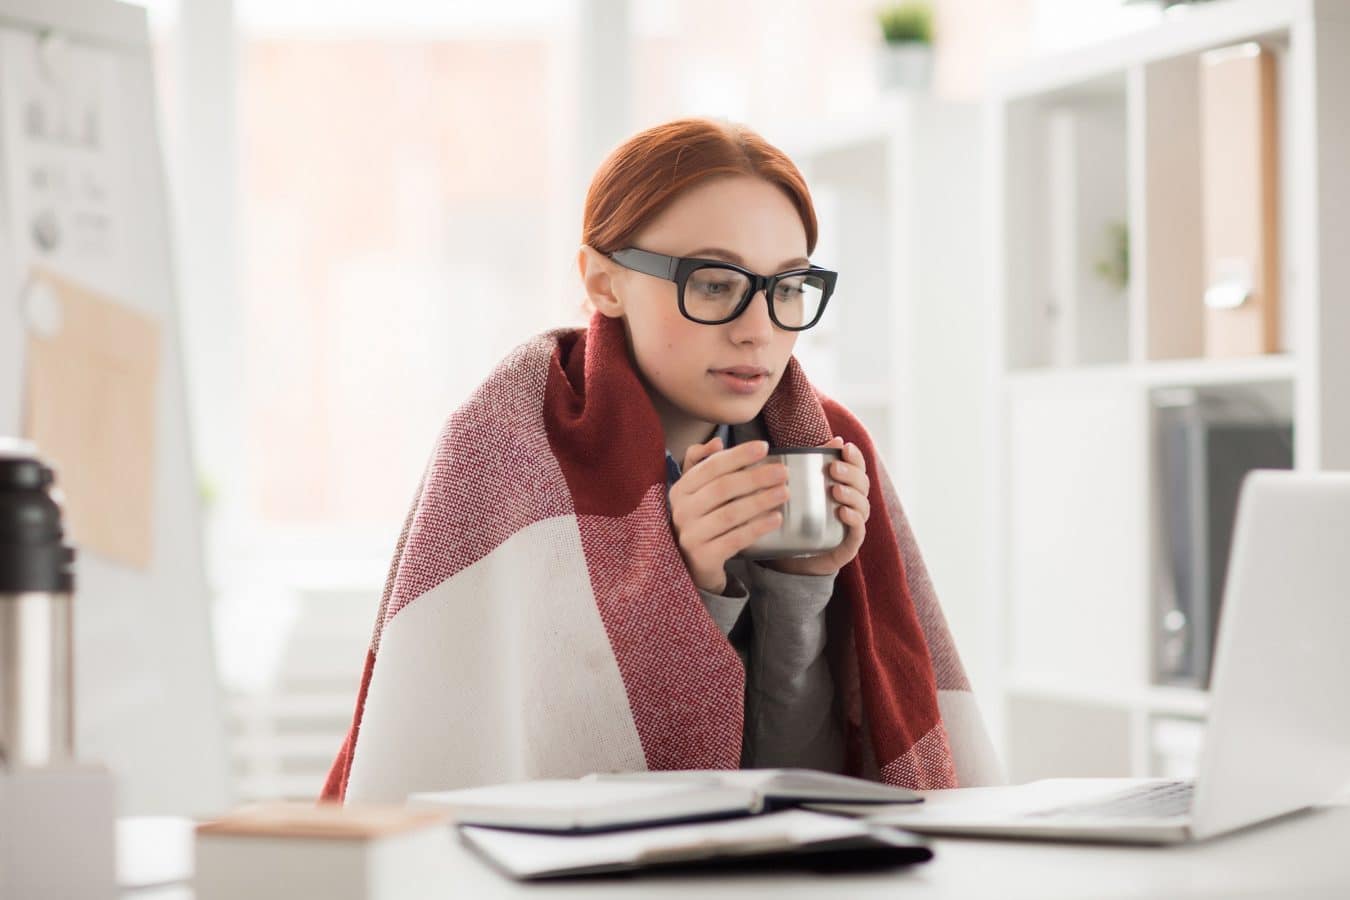 7 tips to help your employees beat the winter blues